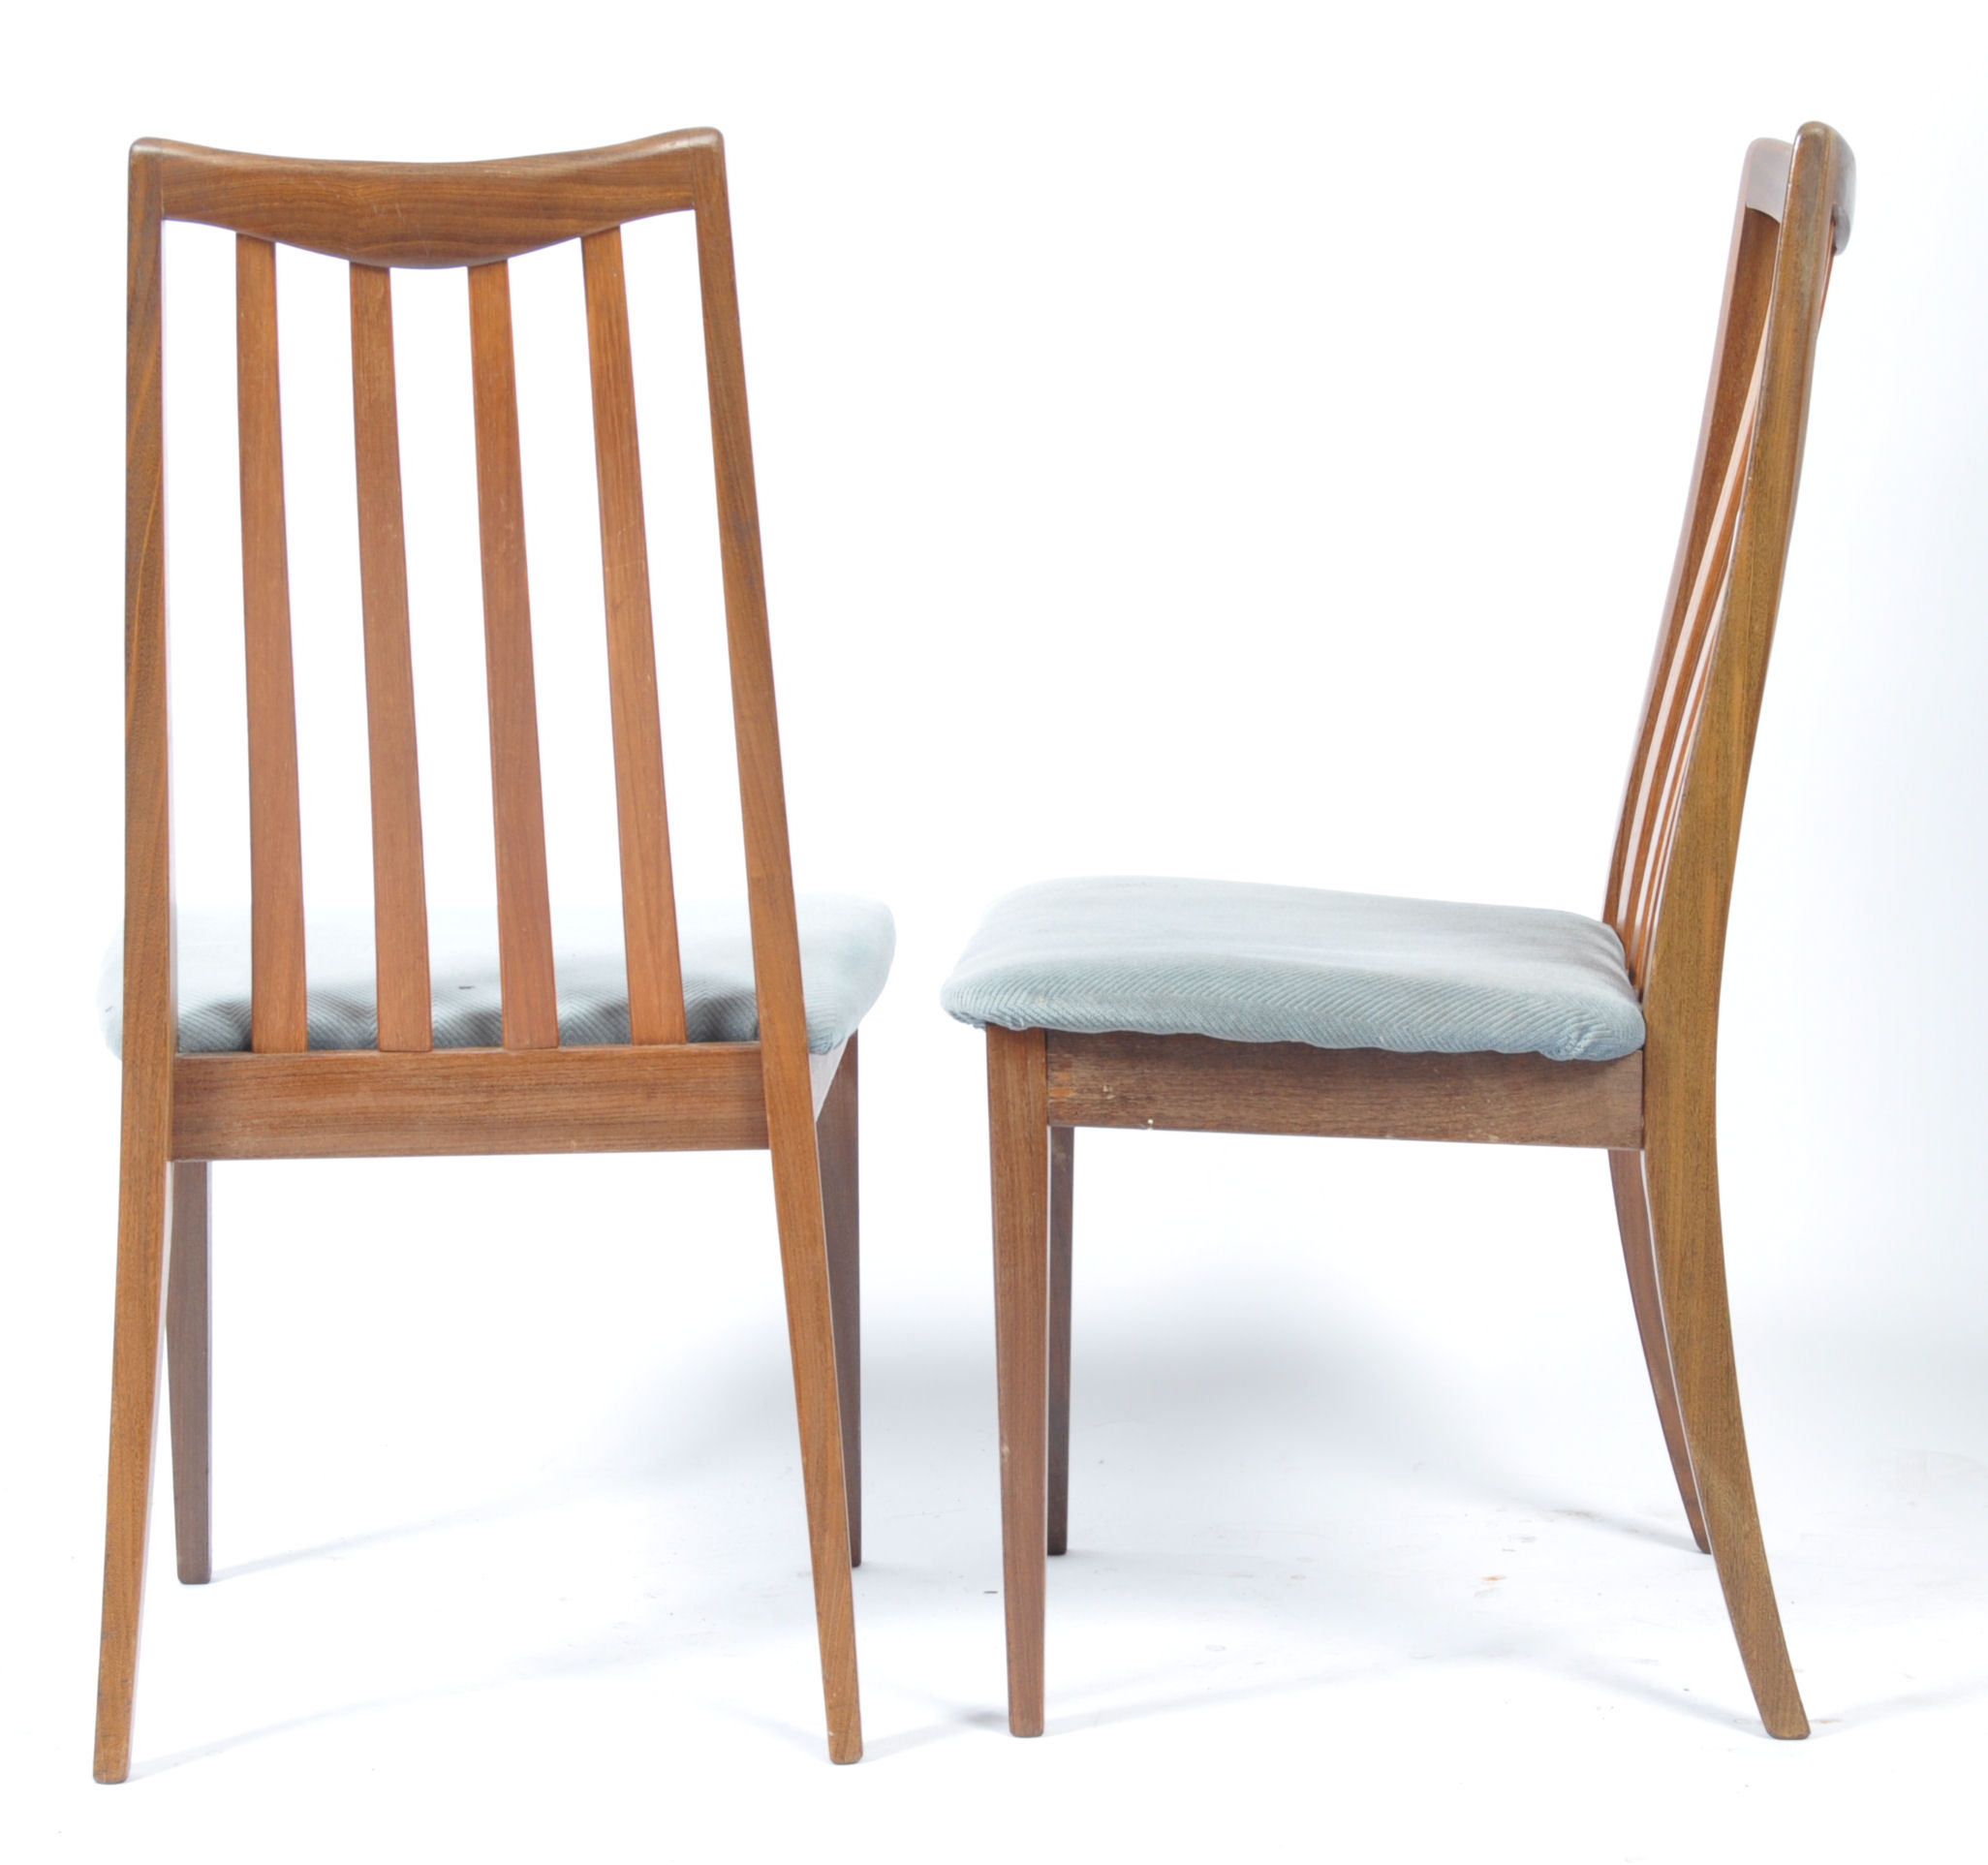 LESLIE DANDY FOR G-PLAN SET OF 4 TEAK WOOD DINING CHAIRS - Image 5 of 5